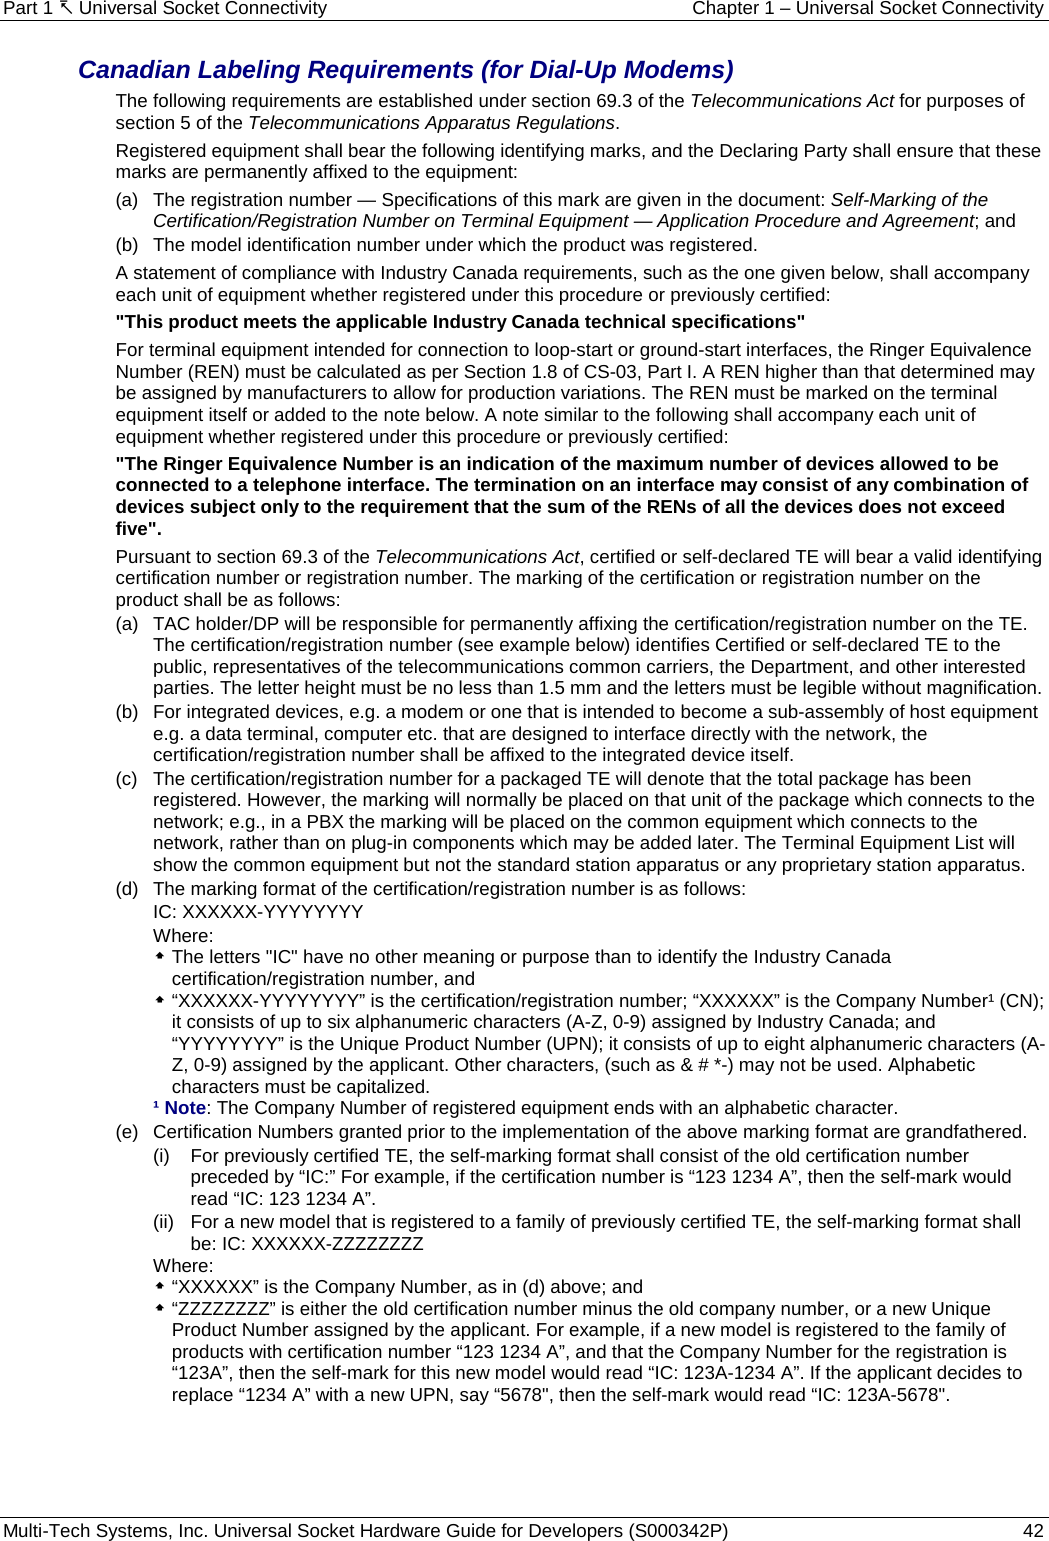 Part 1  Universal Socket Connectivity Chapter 1 – Universal Socket Connectivity Multi-Tech Systems, Inc. Universal Socket Hardware Guide for Developers (S000342P)  42  Canadian Labeling Requirements (for Dial-Up Modems) The following requirements are established under section 69.3 of the Telecommunications Act for purposes of section 5 of the Telecommunications Apparatus Regulations. Registered equipment shall bear the following identifying marks, and the Declaring Party shall ensure that these marks are permanently affixed to the equipment: (a)   The registration number — Specifications of this mark are given in the document: Self-Marking of the Certification/Registration Number on Terminal Equipment — Application Procedure and Agreement; and (b)   The model identification number under which the product was registered. A statement of compliance with Industry Canada requirements, such as the one given below, shall accompany each unit of equipment whether registered under this procedure or previously certified: &quot;This product meets the applicable Industry Canada technical specifications&quot; For terminal equipment intended for connection to loop-start or ground-start interfaces, the Ringer Equivalence Number (REN) must be calculated as per Section 1.8 of CS-03, Part I. A REN higher than that determined may be assigned by manufacturers to allow for production variations. The REN must be marked on the terminal equipment itself or added to the note below. A note similar to the following shall accompany each unit of equipment whether registered under this procedure or previously certified: &quot;The Ringer Equivalence Number is an indication of the maximum number of devices allowed to be connected to a telephone interface. The termination on an interface may consist of any combination of devices subject only to the requirement that the sum of the RENs of all the devices does not exceed five&quot;. Pursuant to section 69.3 of the Telecommunications Act, certified or self-declared TE will bear a valid identifying certification number or registration number. The marking of the certification or registration number on the product shall be as follows: (a)   TAC holder/DP will be responsible for permanently affixing the certification/registration number on the TE. The certification/registration number (see example below) identifies Certified or self-declared TE to the public, representatives of the telecommunications common carriers, the Department, and other interested parties. The letter height must be no less than 1.5 mm and the letters must be legible without magnification. (b)   For integrated devices, e.g. a modem or one that is intended to become a sub-assembly of host equipment e.g. a data terminal, computer etc. that are designed to interface directly with the network, the certification/registration number shall be affixed to the integrated device itself. (c)   The certification/registration number for a packaged TE will denote that the total package has been registered. However, the marking will normally be placed on that unit of the package which connects to the network; e.g., in a PBX the marking will be placed on the common equipment which connects to the network, rather than on plug-in components which may be added later. The Terminal Equipment List will show the common equipment but not the standard station apparatus or any proprietary station apparatus. (d)   The marking format of the certification/registration number is as follows: IC: XXXXXX-YYYYYYYY Where:  The letters &quot;IC&quot; have no other meaning or purpose than to identify the Industry Canada certification/registration number, and  “XXXXXX-YYYYYYYY” is the certification/registration number; “XXXXXX” is the Company Number¹ (CN); it consists of up to six alphanumeric characters (A-Z, 0-9) assigned by Industry Canada; and “YYYYYYYY” is the Unique Product Number (UPN); it consists of up to eight alphanumeric characters (A-Z, 0-9) assigned by the applicant. Other characters, (such as &amp; # *-) may not be used. Alphabetic characters must be capitalized. ¹ Note: The Company Number of registered equipment ends with an alphabetic character. (e)   Certification Numbers granted prior to the implementation of the above marking format are grandfathered. (i)   For previously certified TE, the self-marking format shall consist of the old certification number preceded by “IC:” For example, if the certification number is “123 1234 A”, then the self-mark would read “IC: 123 1234 A”. (ii)   For a new model that is registered to a family of previously certified TE, the self-marking format shall be: IC: XXXXXX-ZZZZZZZZ Where:   “XXXXXX” is the Company Number, as in (d) above; and  “ZZZZZZZZ” is either the old certification number minus the old company number, or a new Unique Product Number assigned by the applicant. For example, if a new model is registered to the family of products with certification number “123 1234 A”, and that the Company Number for the registration is “123A”, then the self-mark for this new model would read “IC: 123A-1234 A”. If the applicant decides to replace “1234 A” with a new UPN, say “5678&quot;, then the self-mark would read “IC: 123A-5678&quot;.    